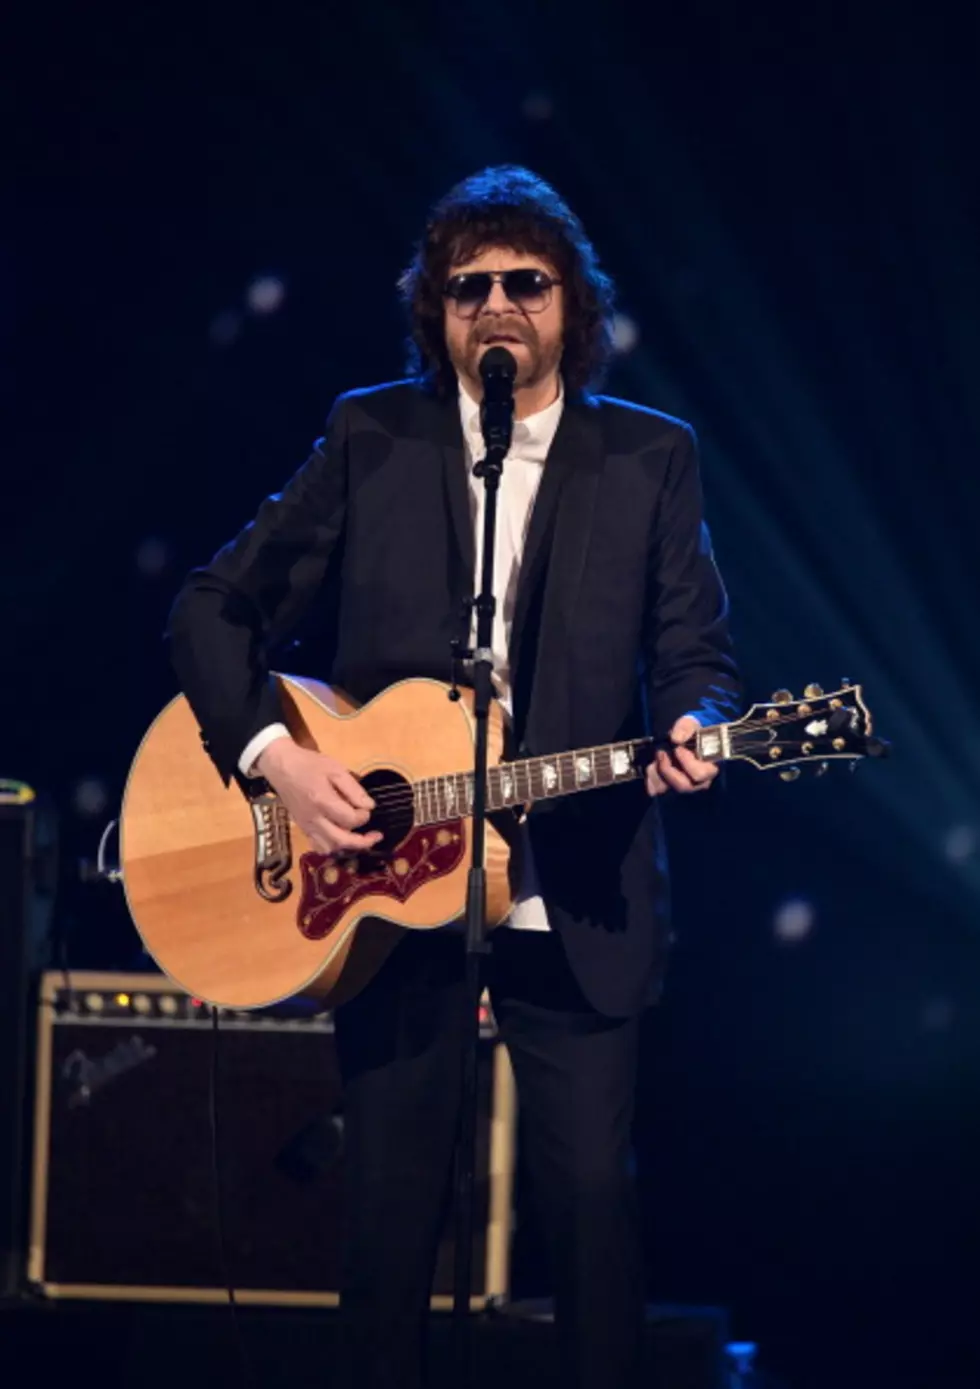 Jeff Lynne To Reunite With ELO For Live Show This Fall [Video]